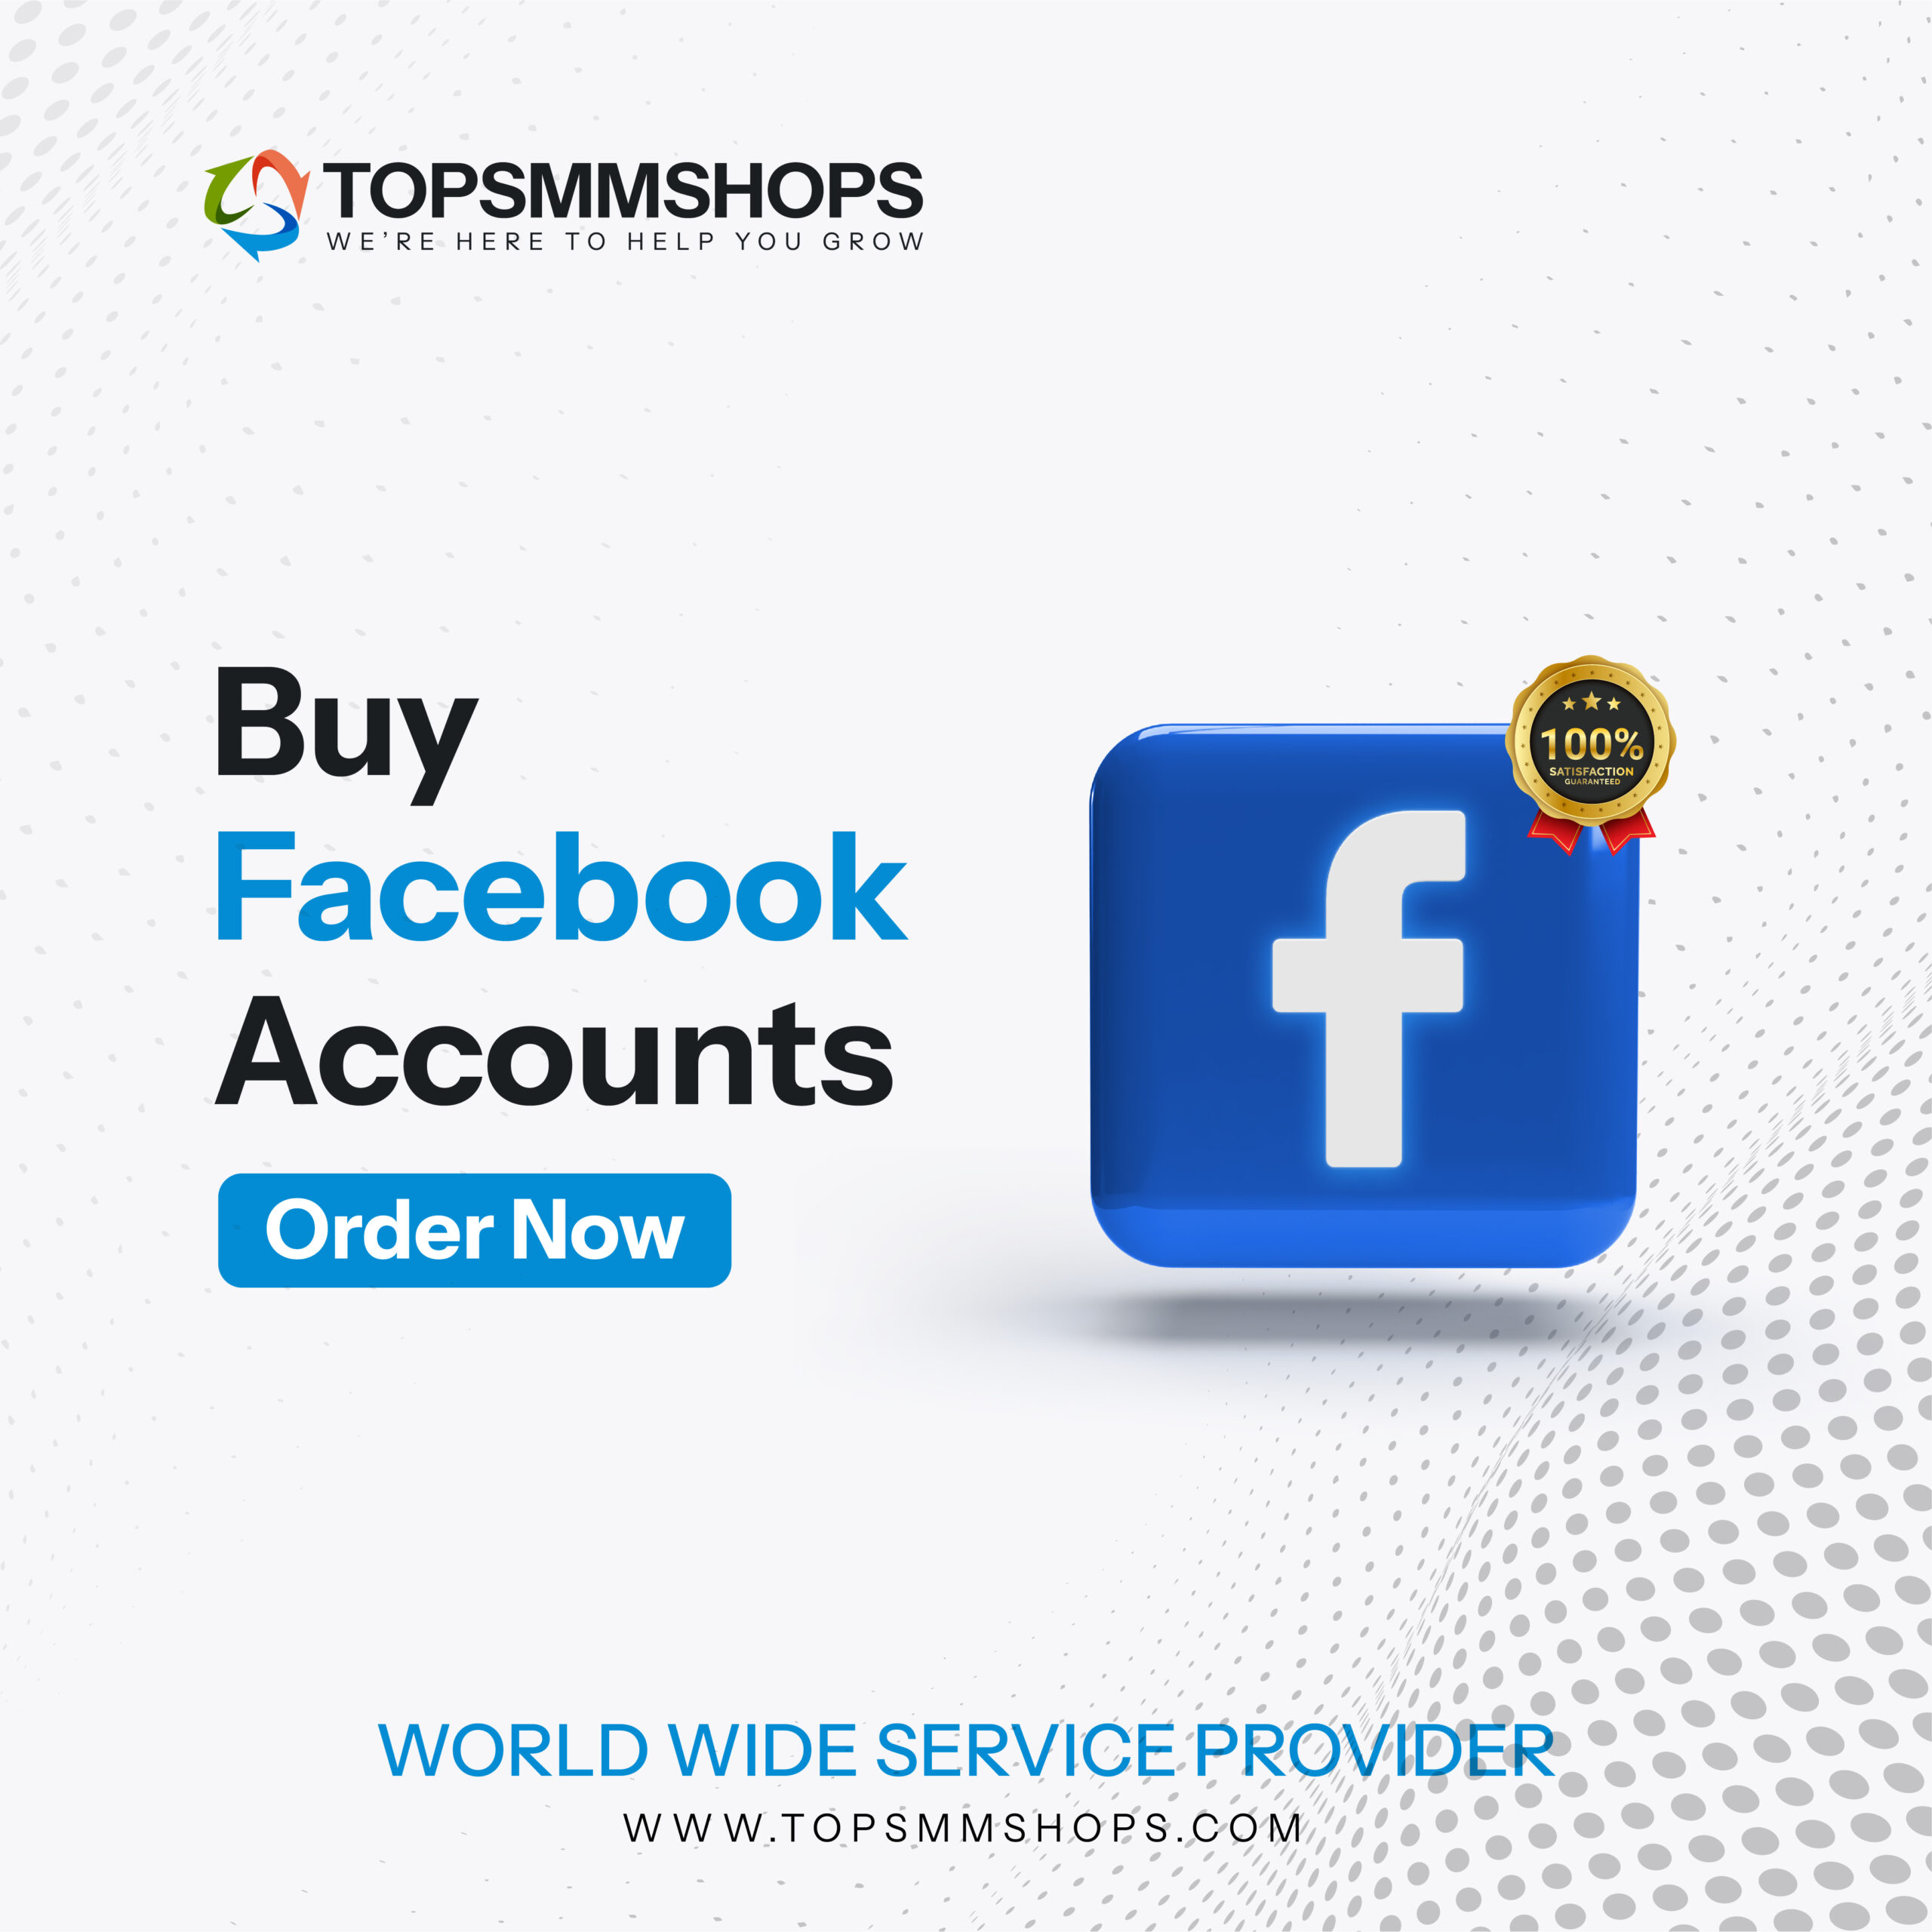 Buy Facebook Accounts - Old and High Quality Facebook...